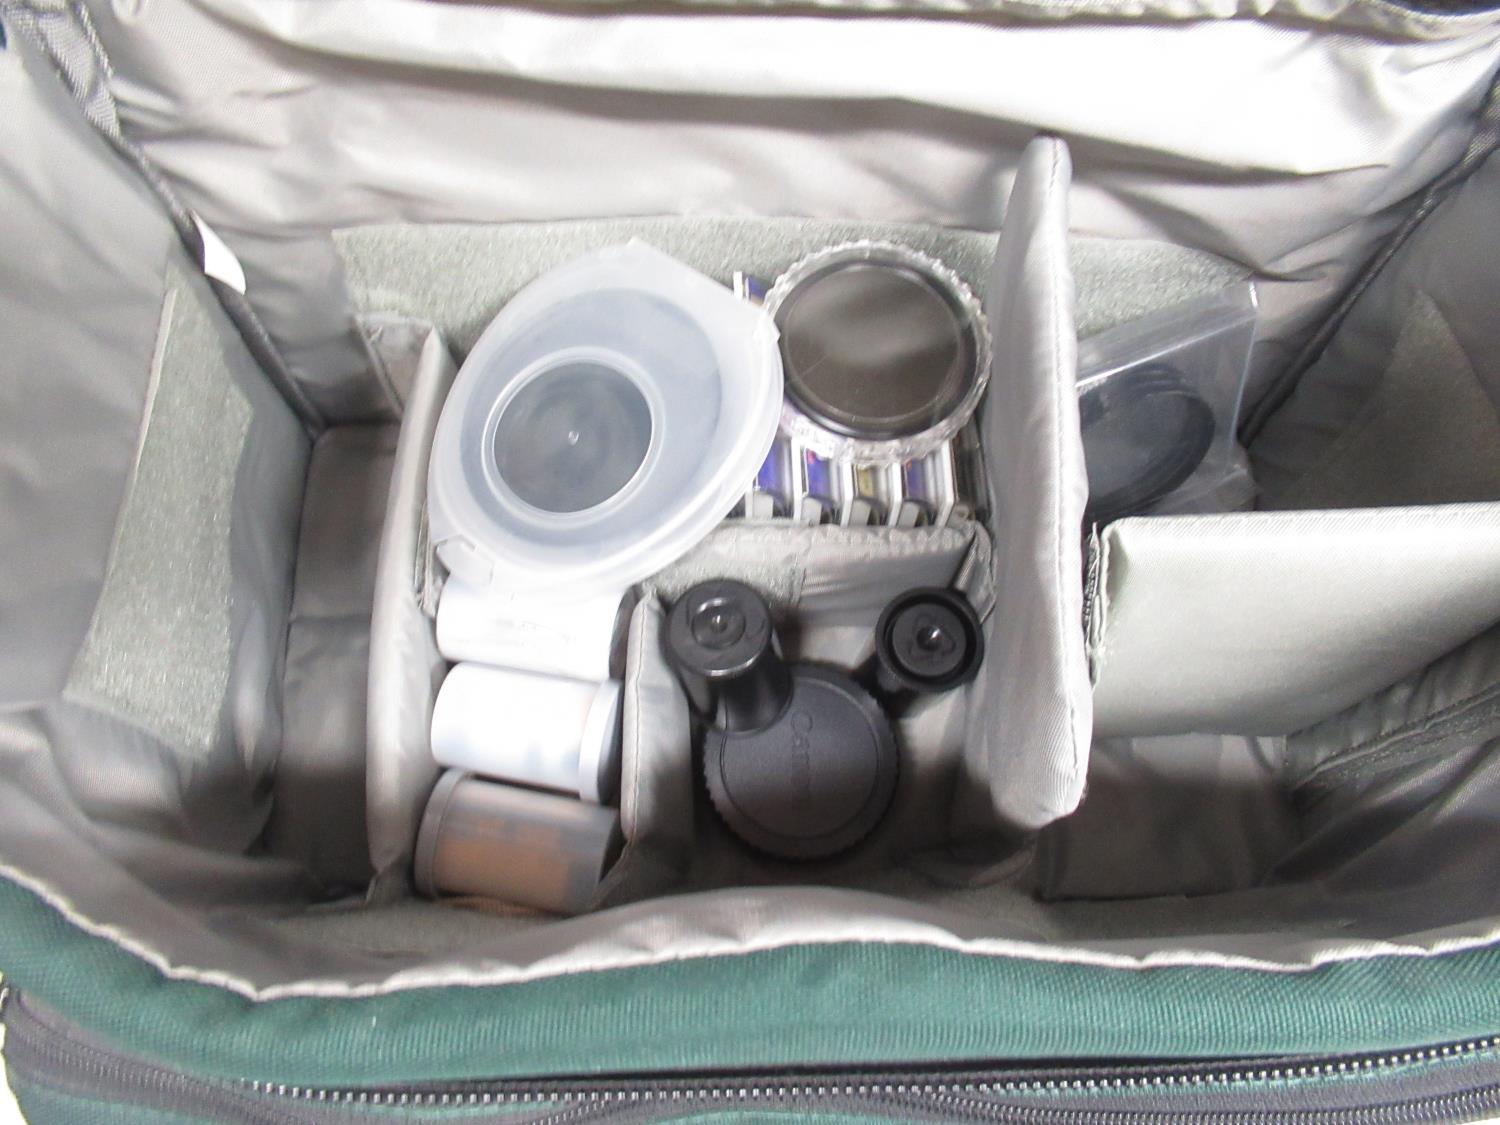 Canon EOS 3 with 28-105mm Ultrasonic lens and a photographers carry bag cont. flashes, lens cleaner, - Image 4 of 4